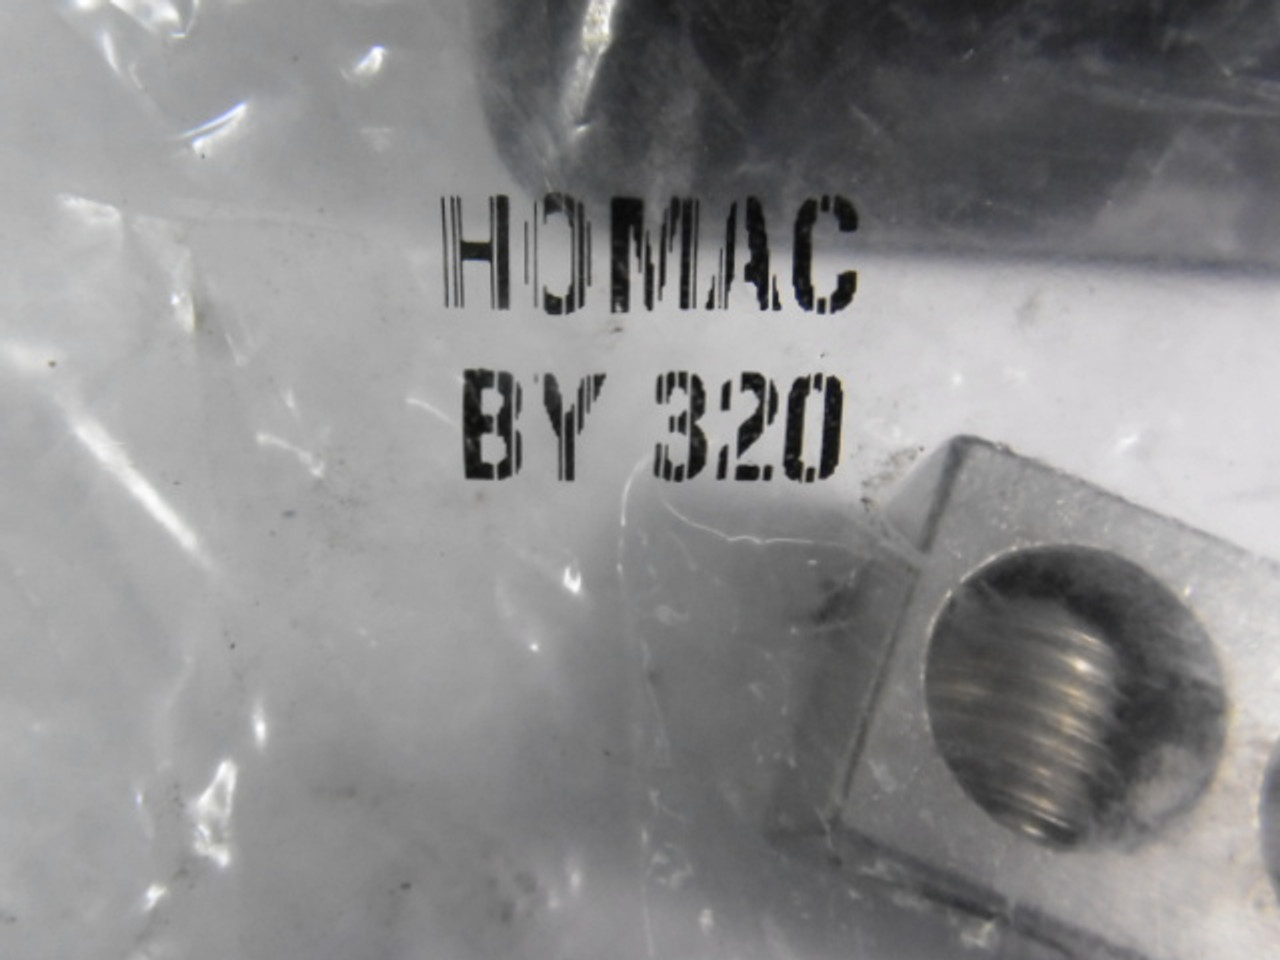 Thomas & Betts BY 320 Insulated Lighting Mechanical Connectors ! NWB !